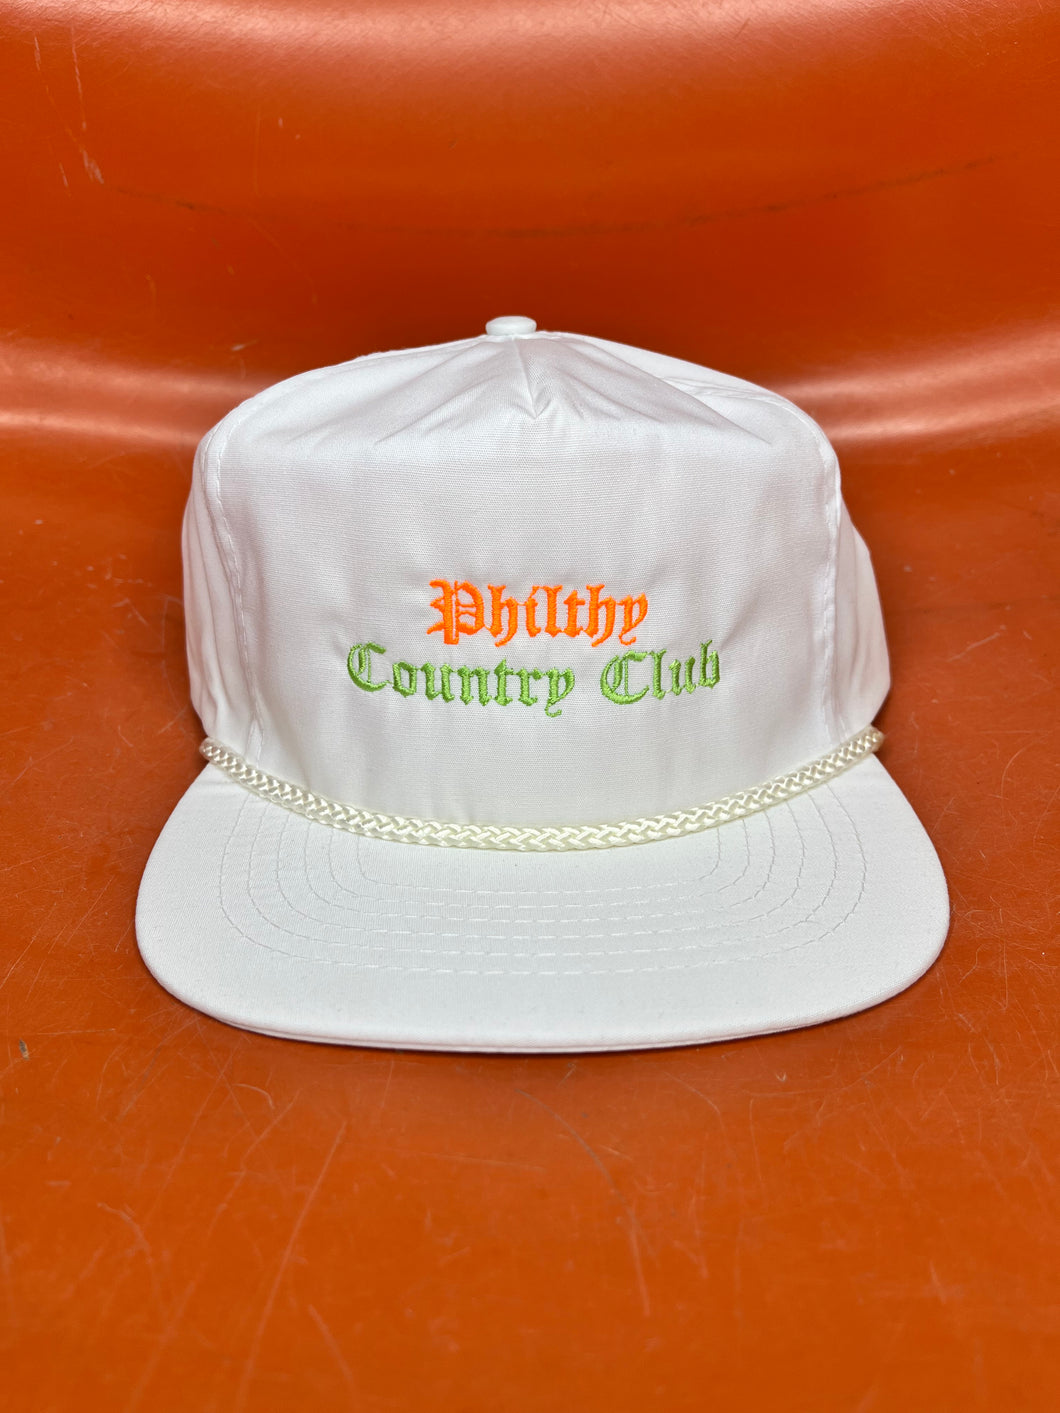 Philthy Country Club Hat